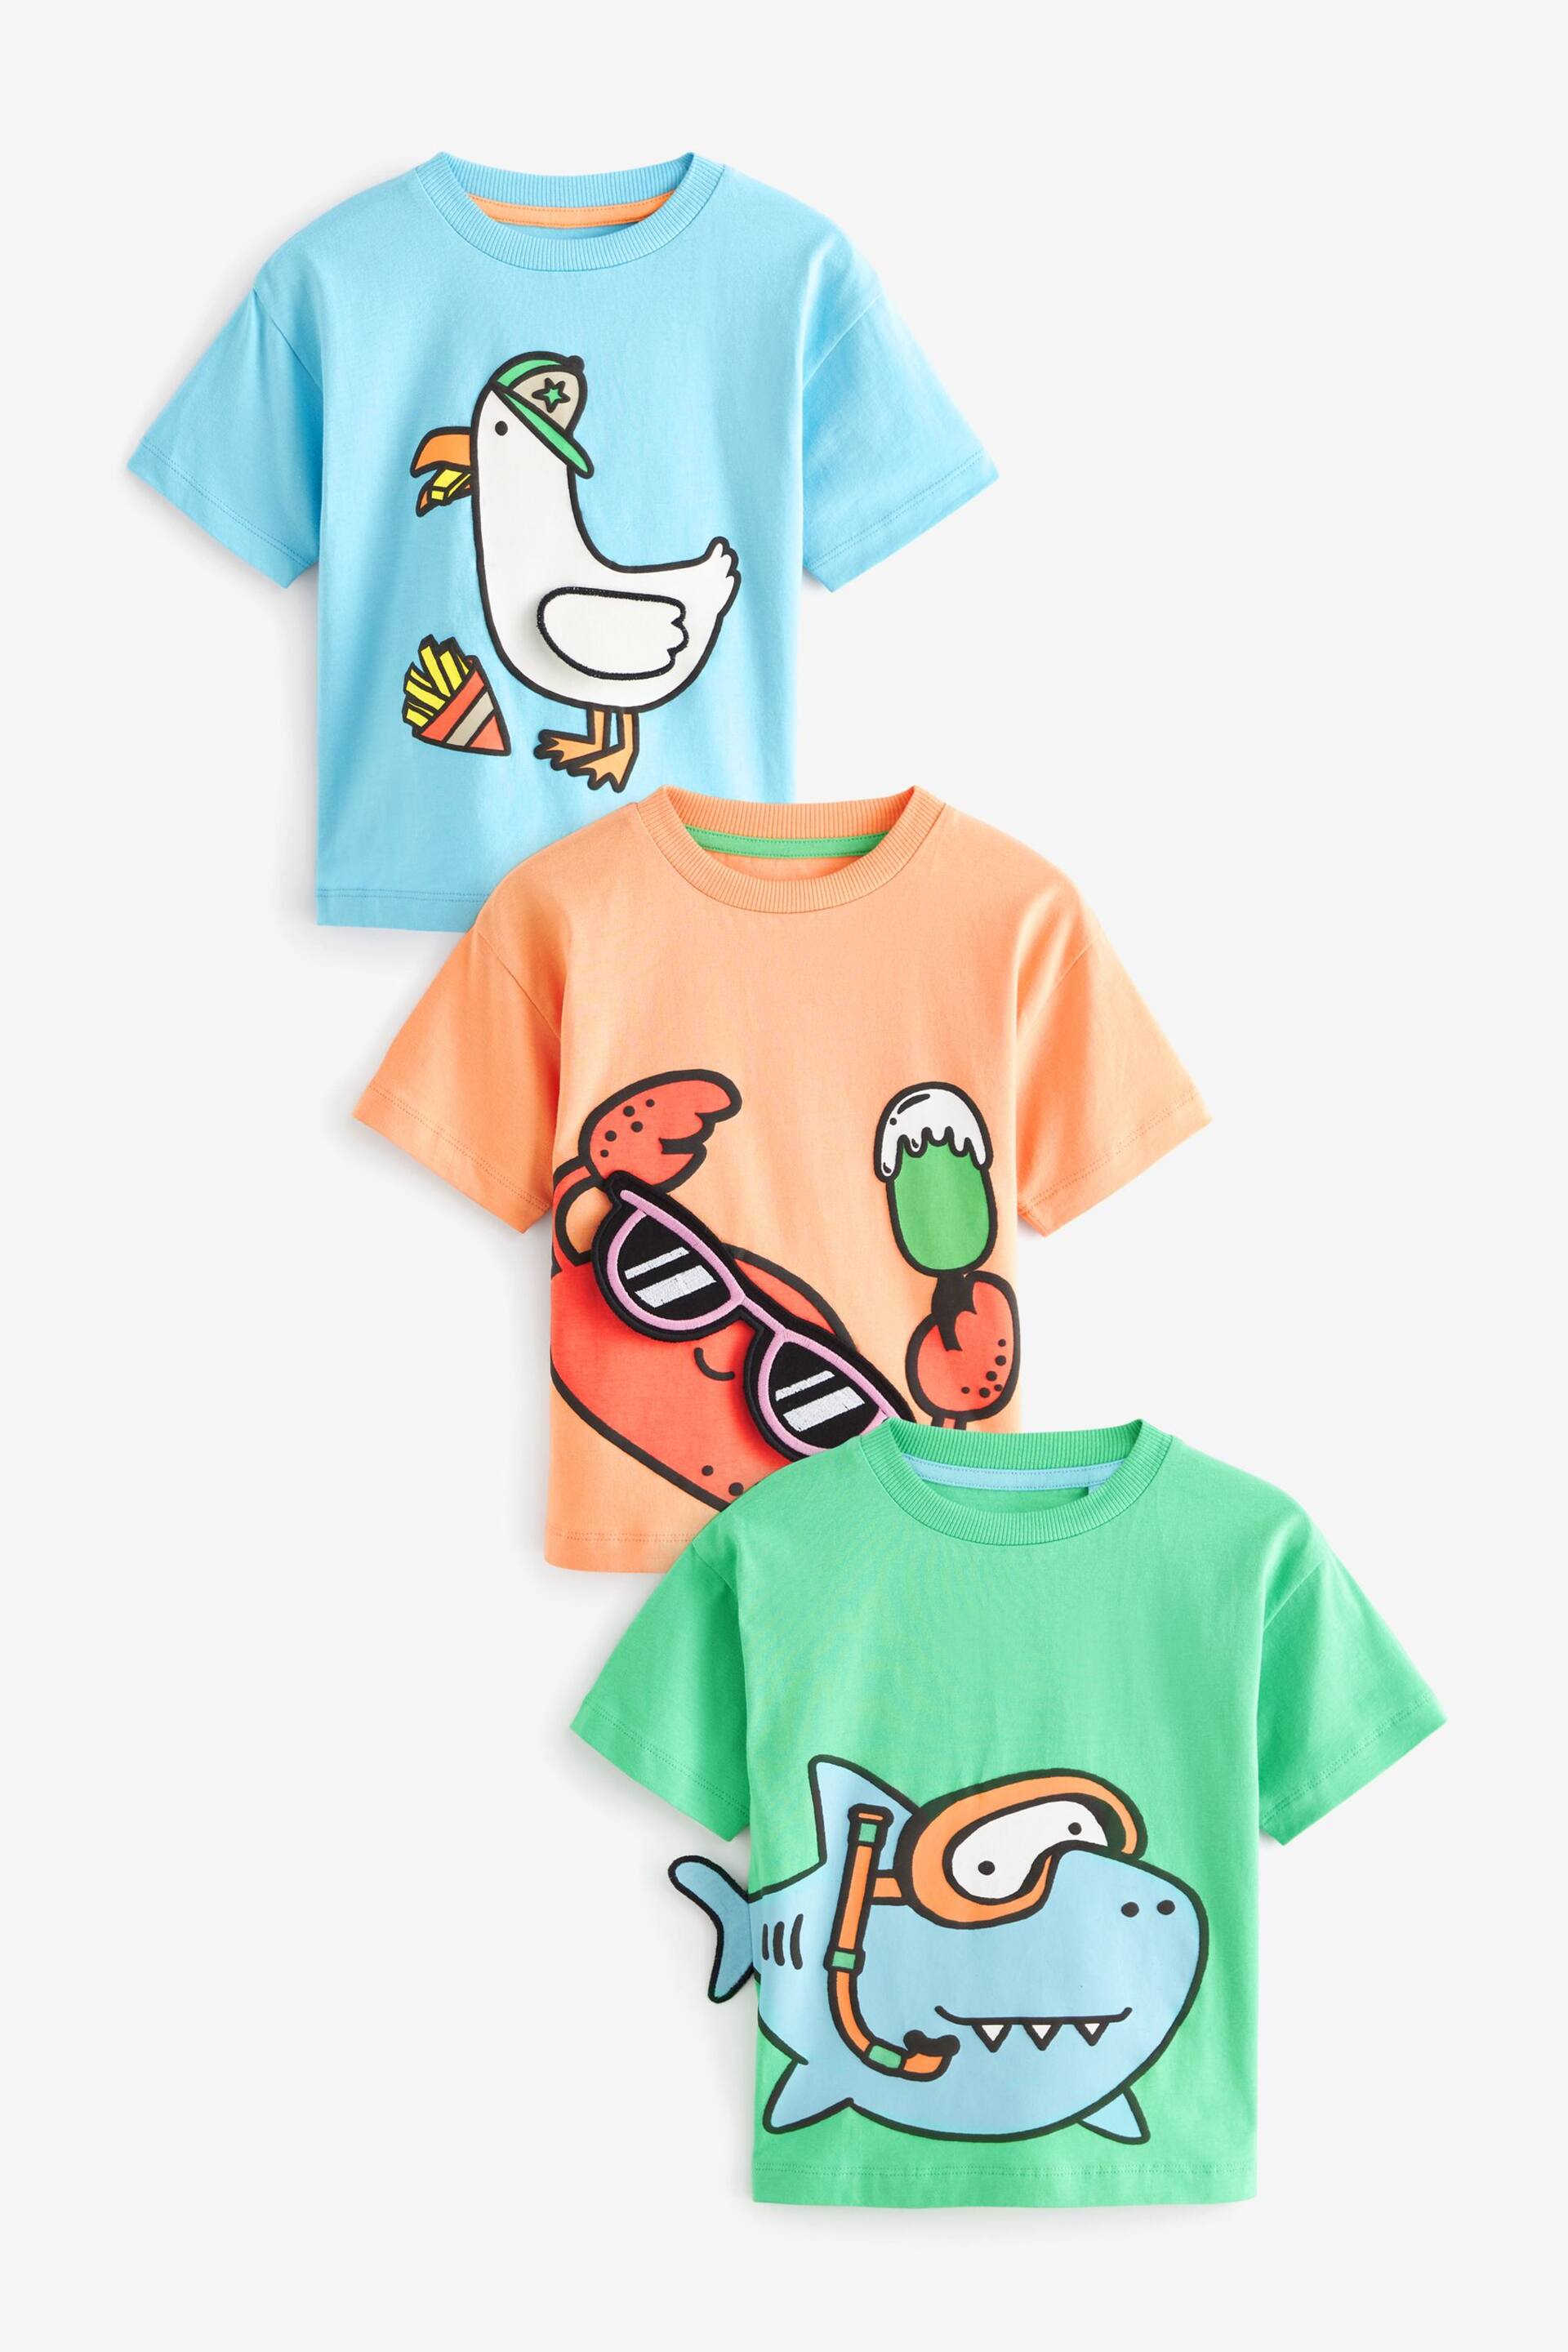 Blue/Green Short Sleeve Character T-Shirts 3 Pack (3mths-7yrs) - Image 1 of 6